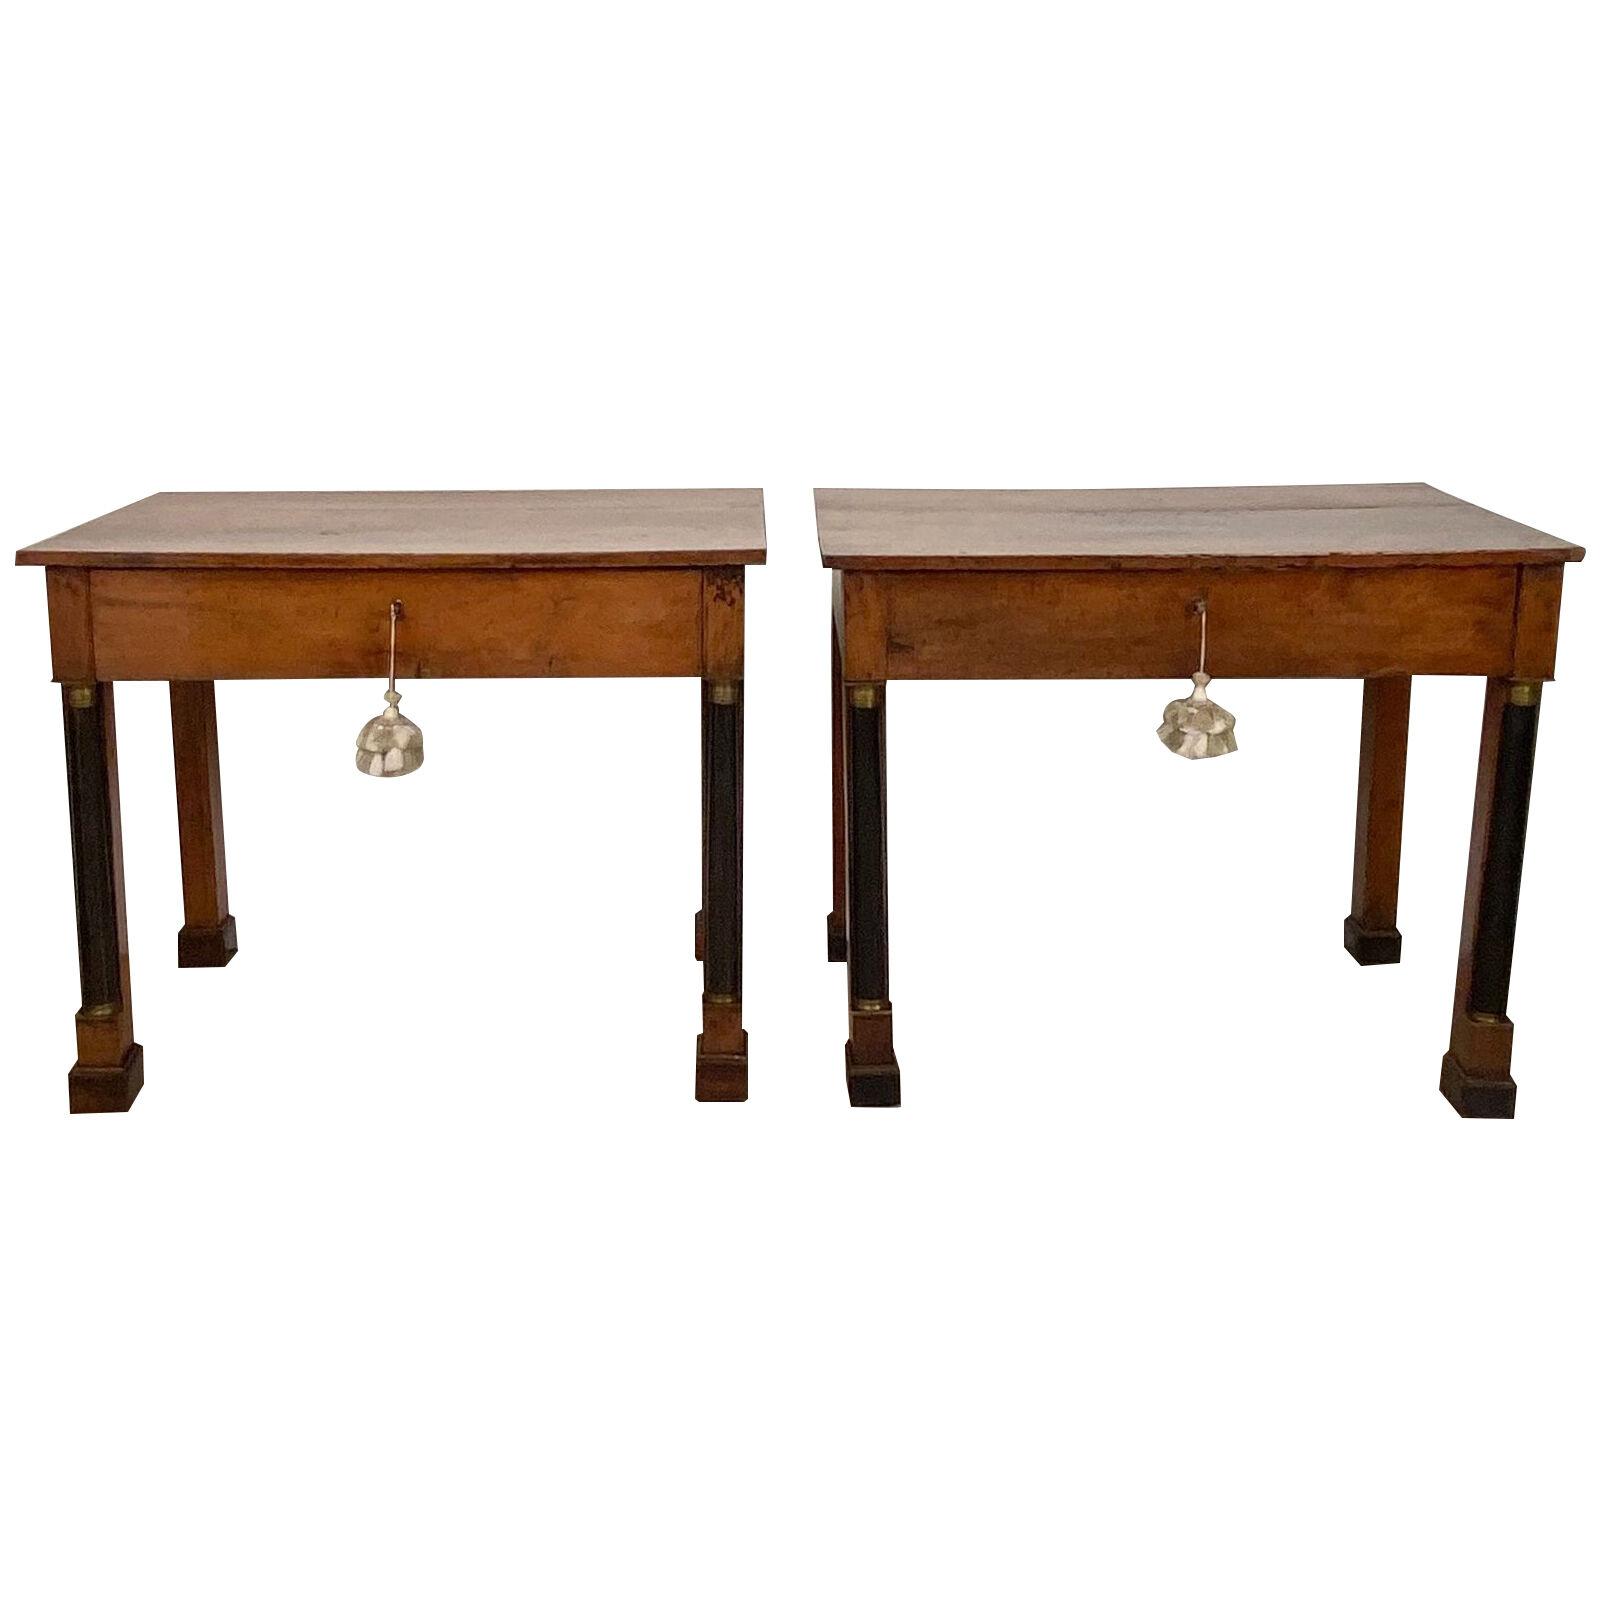 Pair of French Empire One-Drawer Tables, circa 1825